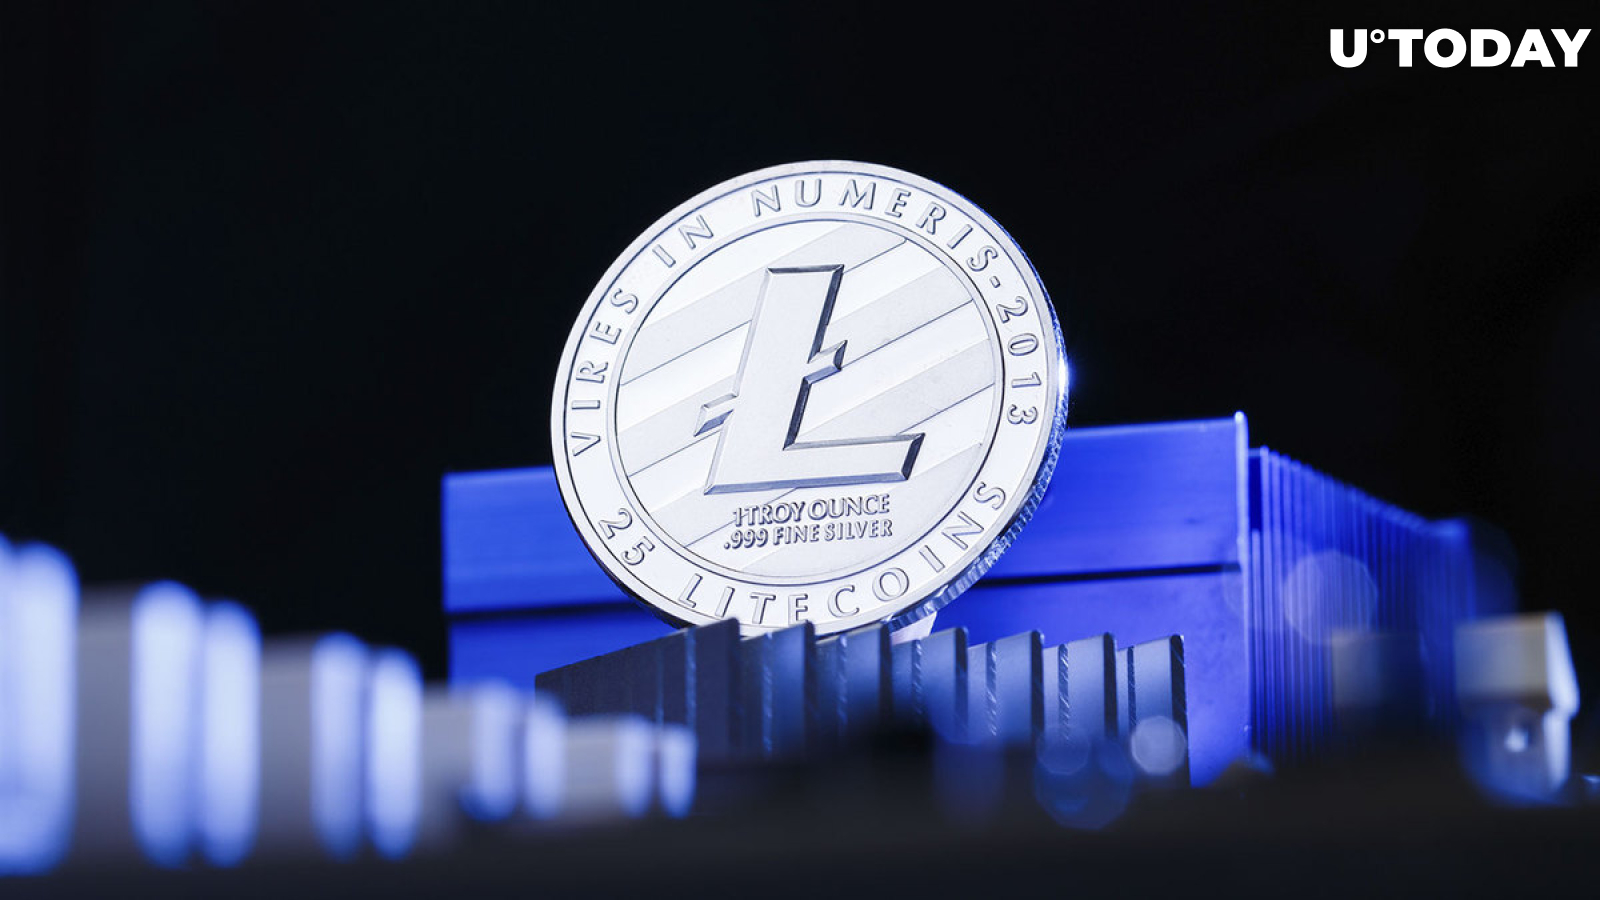 Litecoin Price Takes Giant Leap After Adoption News: Details